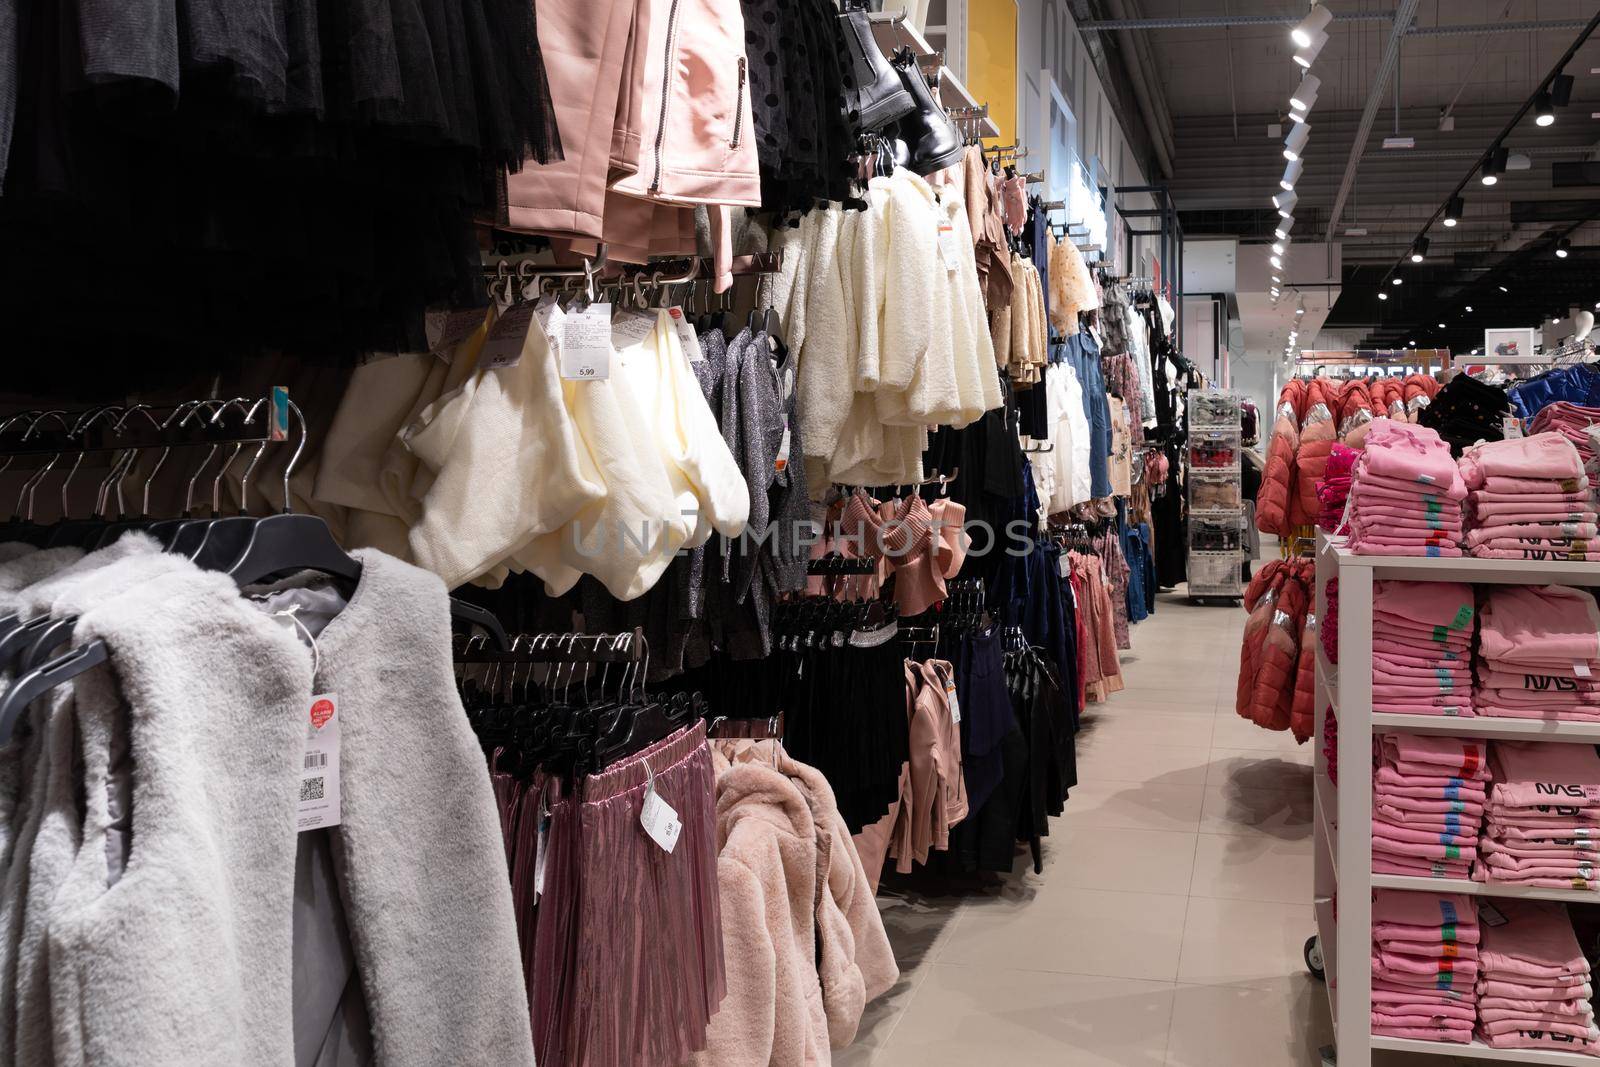 interior of a boutique selling fashionable clothes for children and adults.